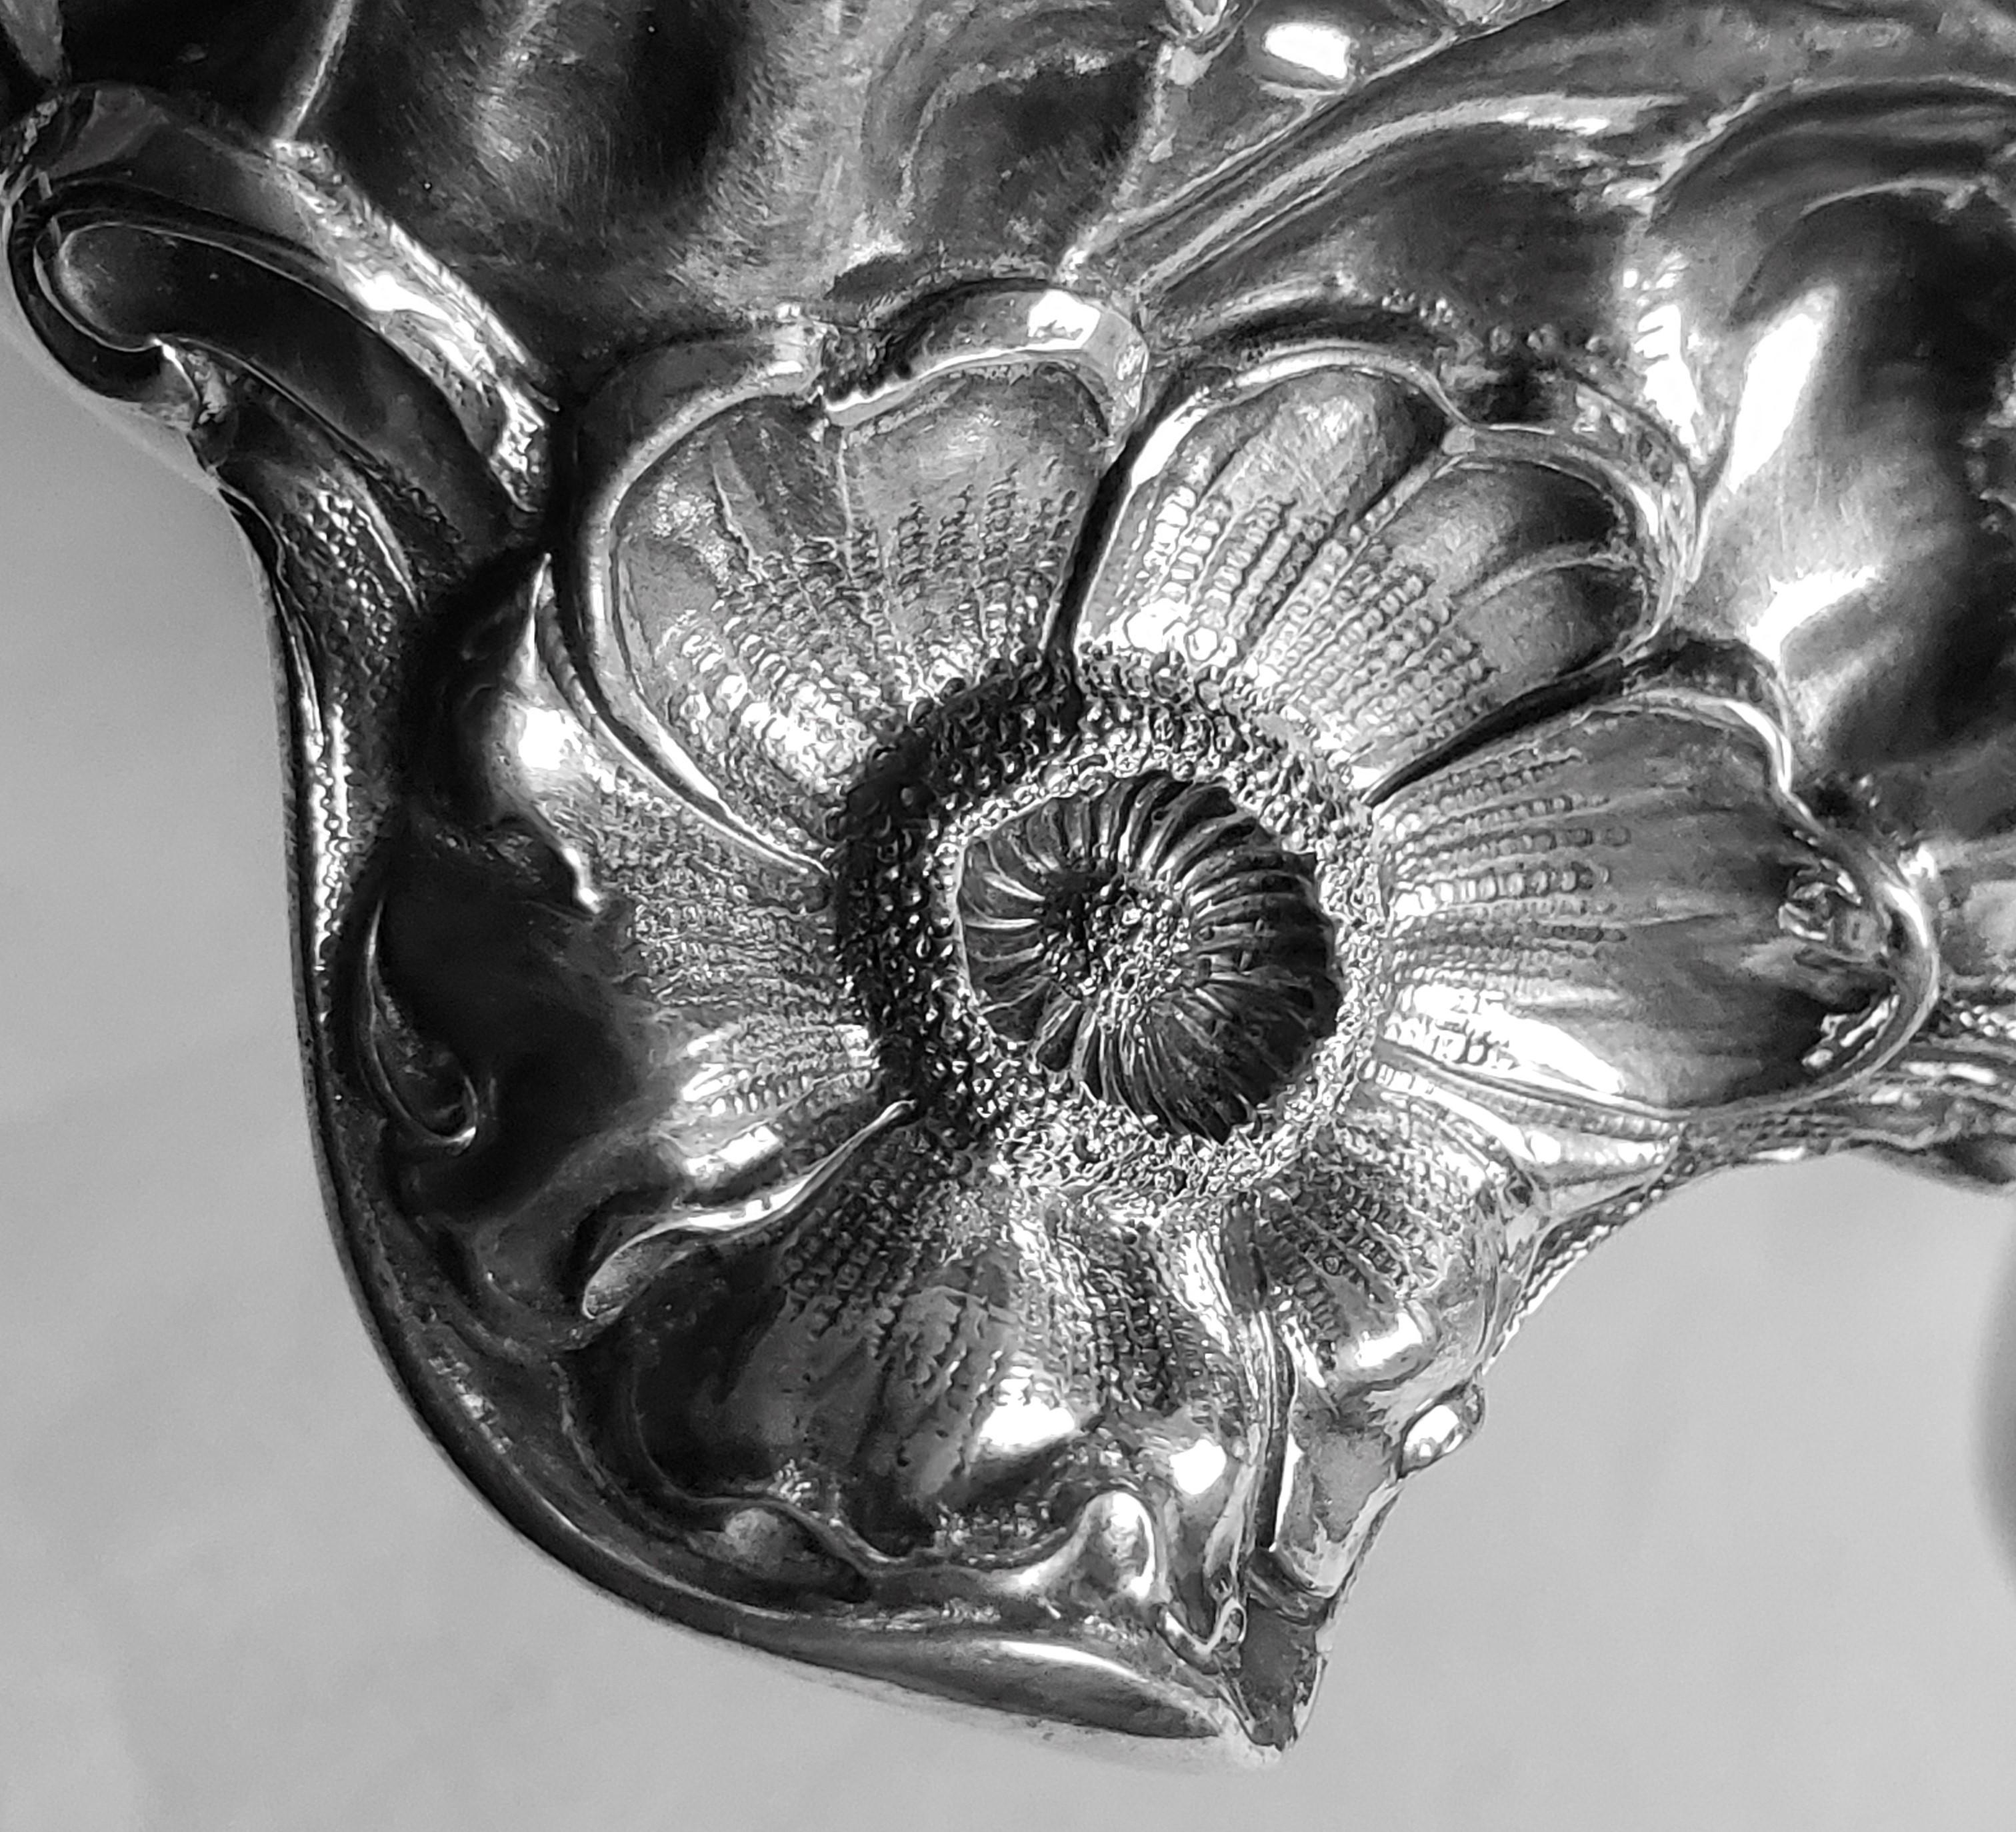 Antique Gorham Sterling Silver Bowl with Ornate Chased Floral Decoration For Sale 8